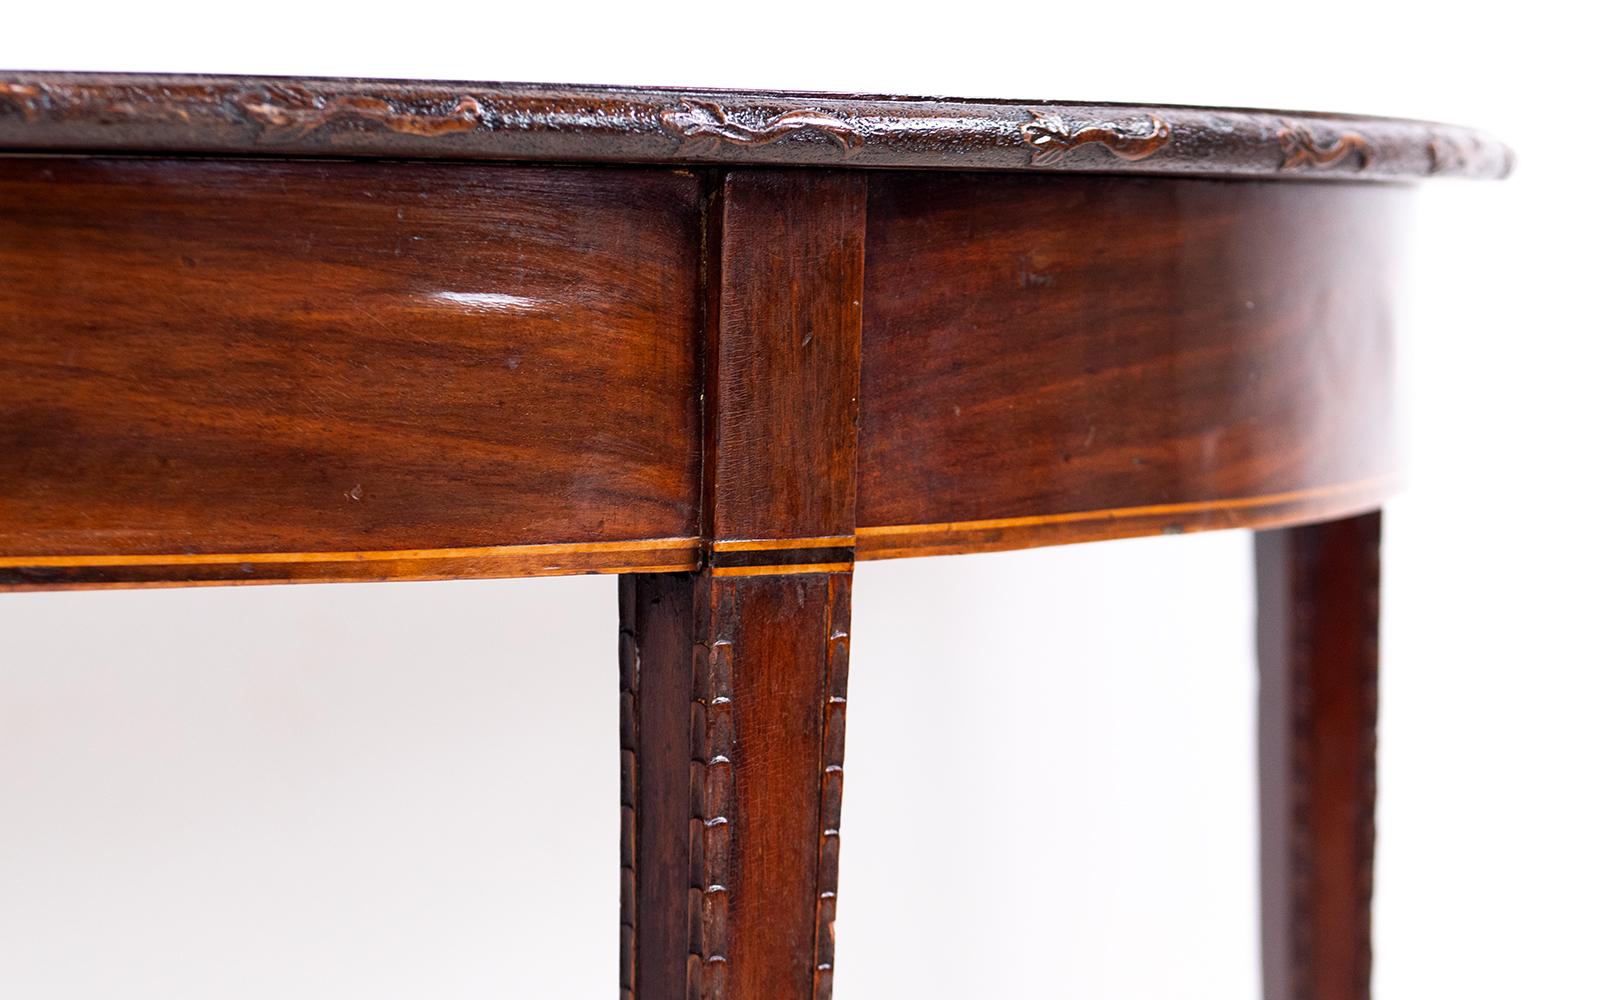 Pair of demi lune tables

A pair of Georgian early 19th-century demilune mahogany console side tables. This pair can be used as side tables or attached together to make a dining table.

Beautiful and detailed edging, tapered legs and spade feet.